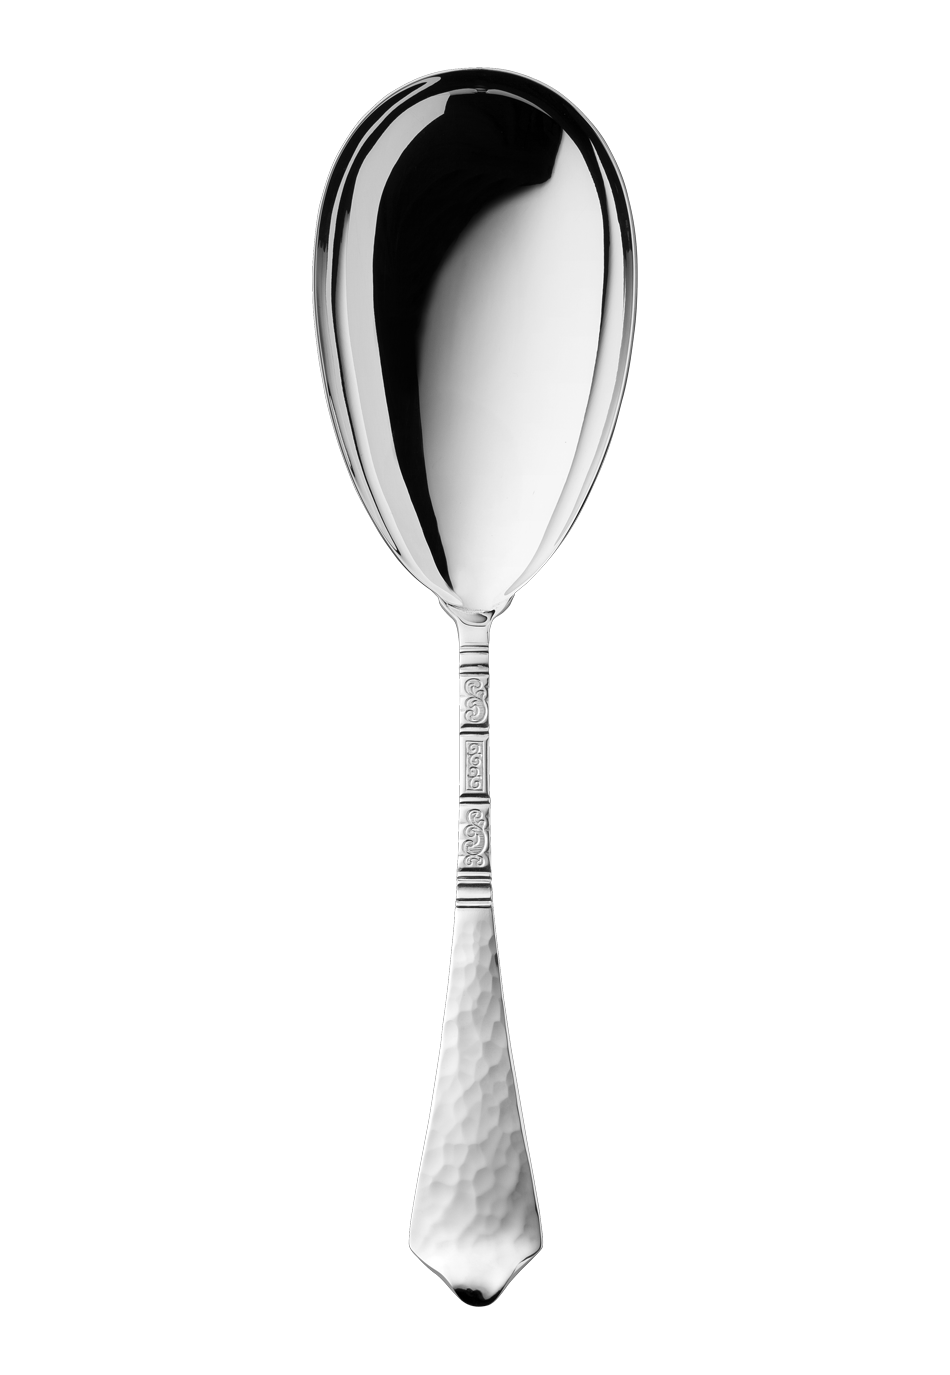 Hermitage Serving Spoon (150g massive silverplated)